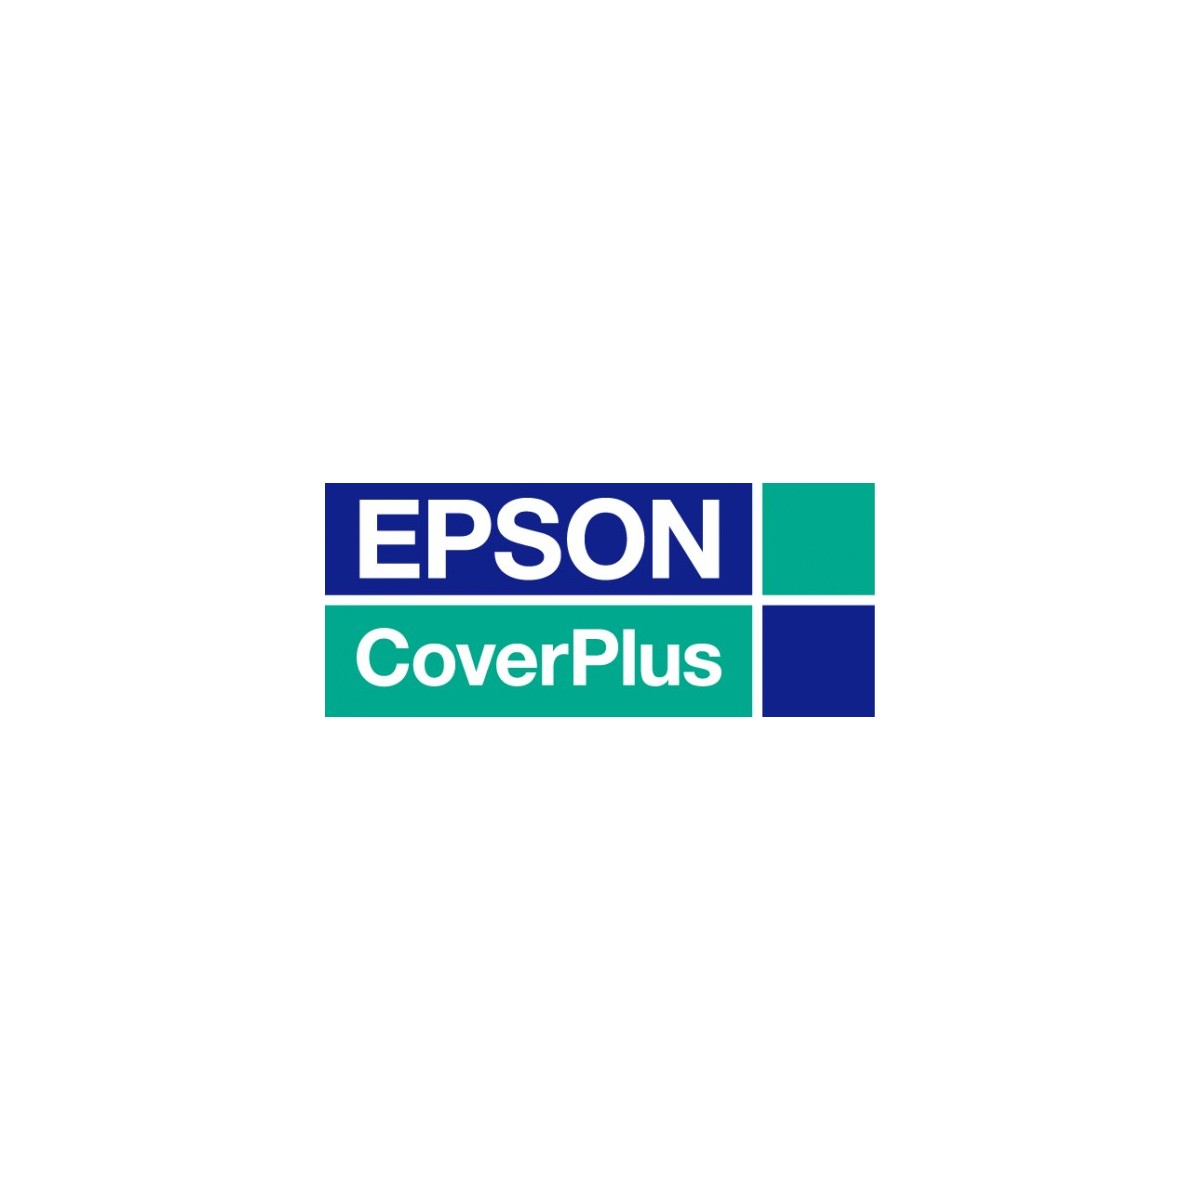 Epson CP03RTBSH599 - 1 license(s) - 3 year(s)